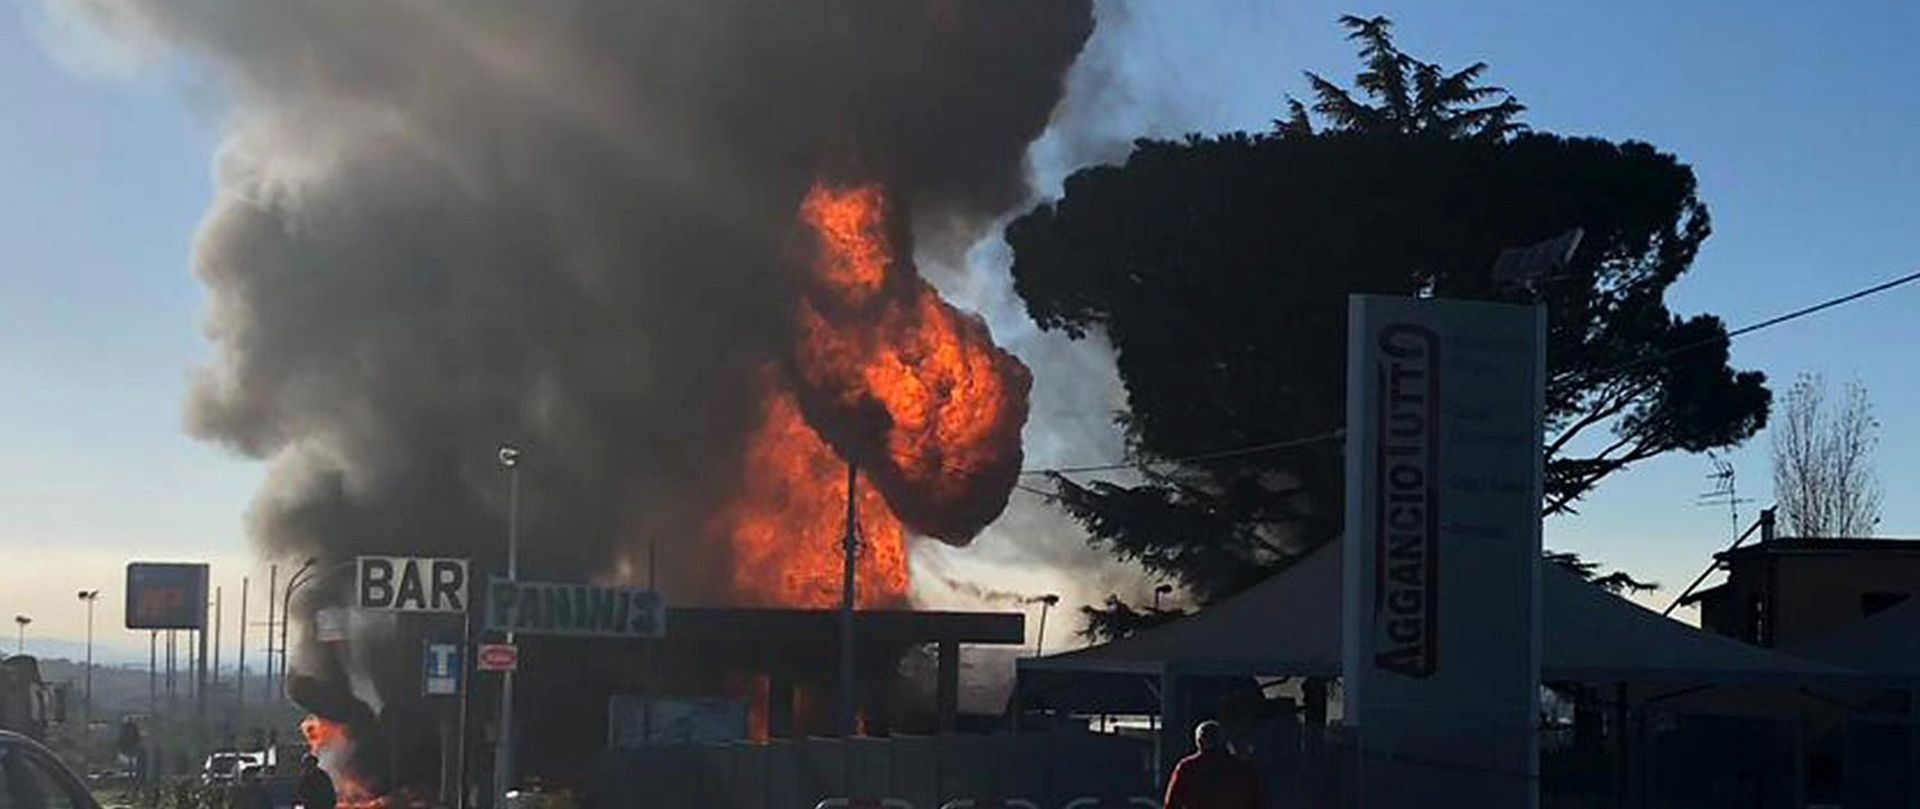 epa07210287 A view of a column of smoke following an explosion that occurred at a petrol station in Borgo Quinzio, near Rieti, central Italy, 05 December 2018. Two people were killed and about a dozen of others were injured after an explosion at a petrol station in the central province of Rieti, police sources said. The two victims were a firefighter and a person who was near the station when a liquefied petroleum gas tanker reportedly exploded, media said.  EPA/EMILIANO GRILLOTTI